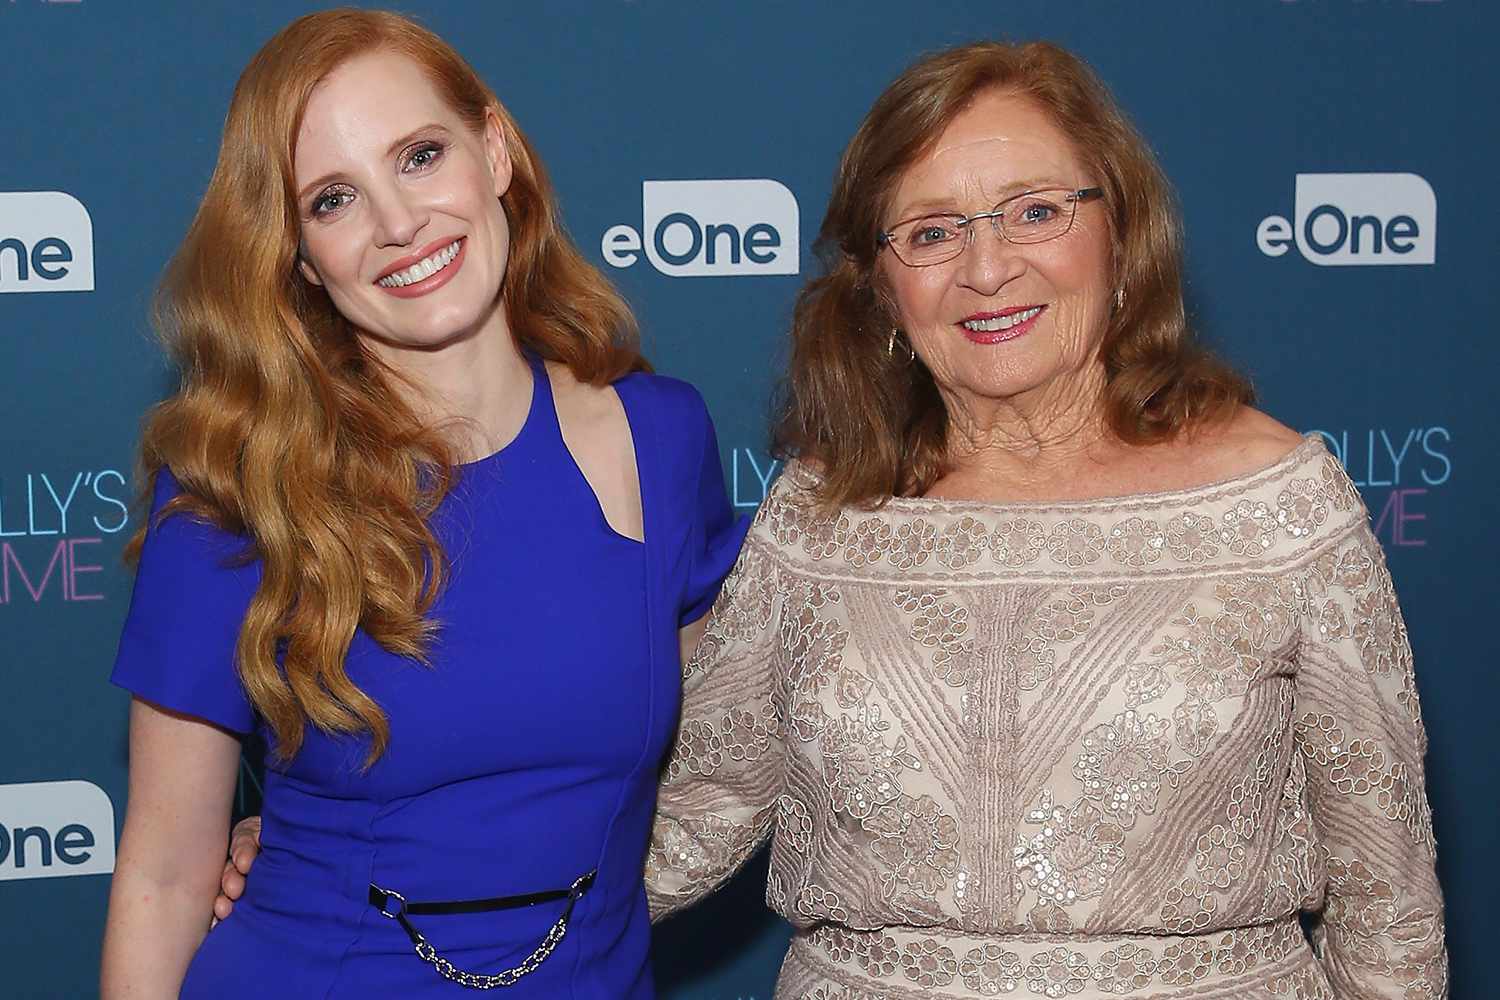 Jessica Chastain Says Grandmother Once Sat on Bradley Cooper's Lap at Party: 'He Looked Horrified'